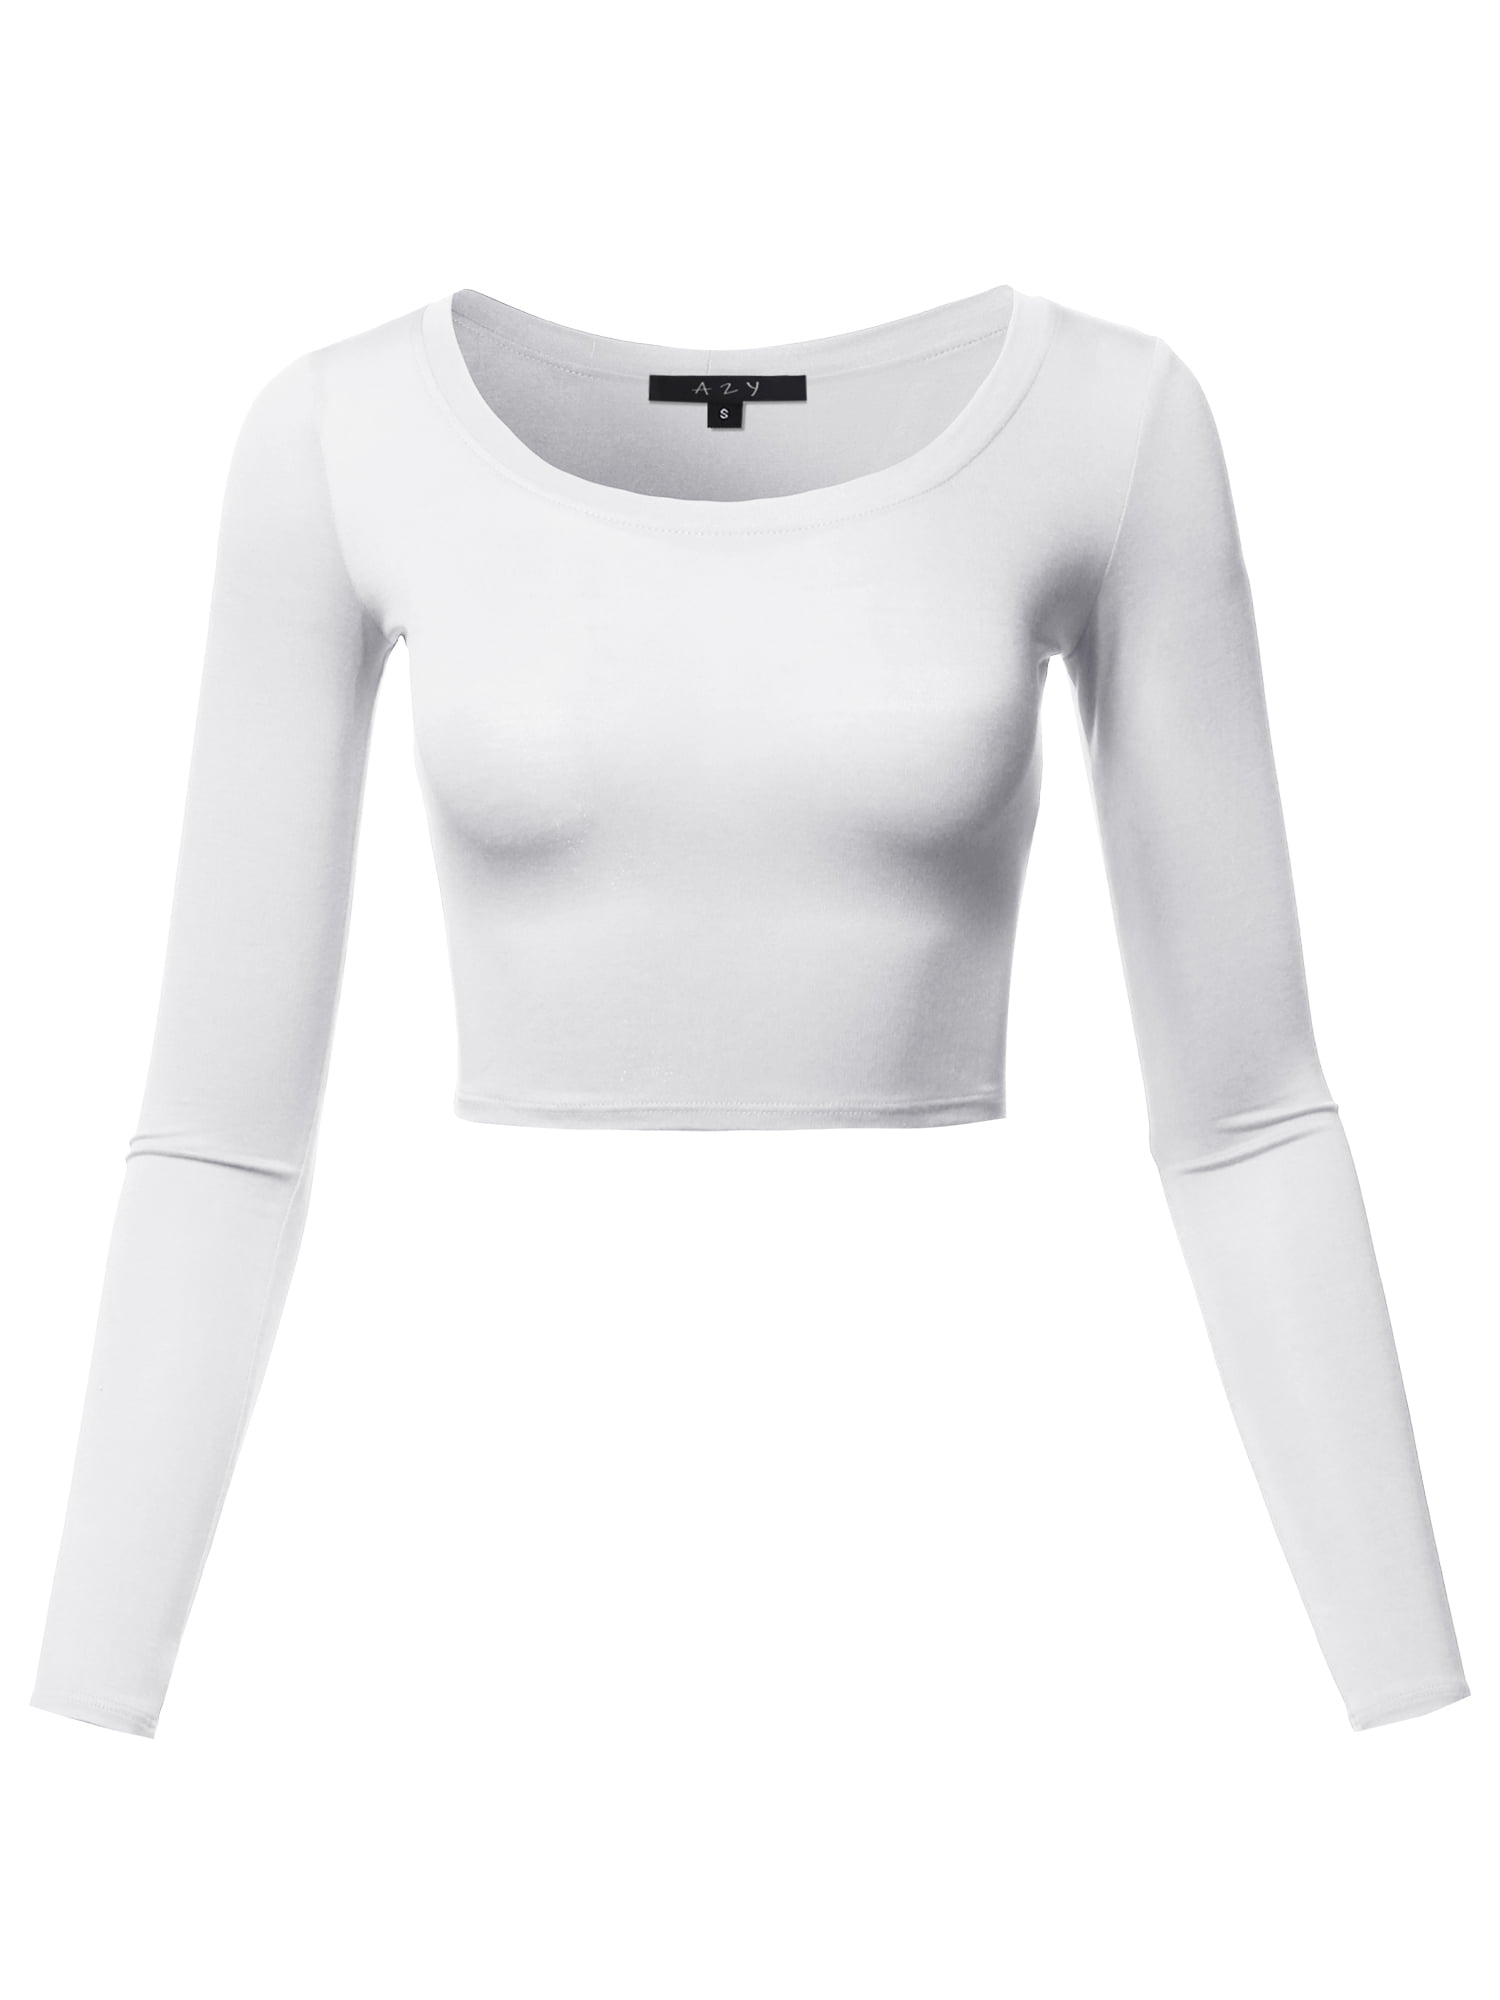 A2Y Women's Basic Solid Stretchable Scoop Neck Long Sleeve Crop Top White M